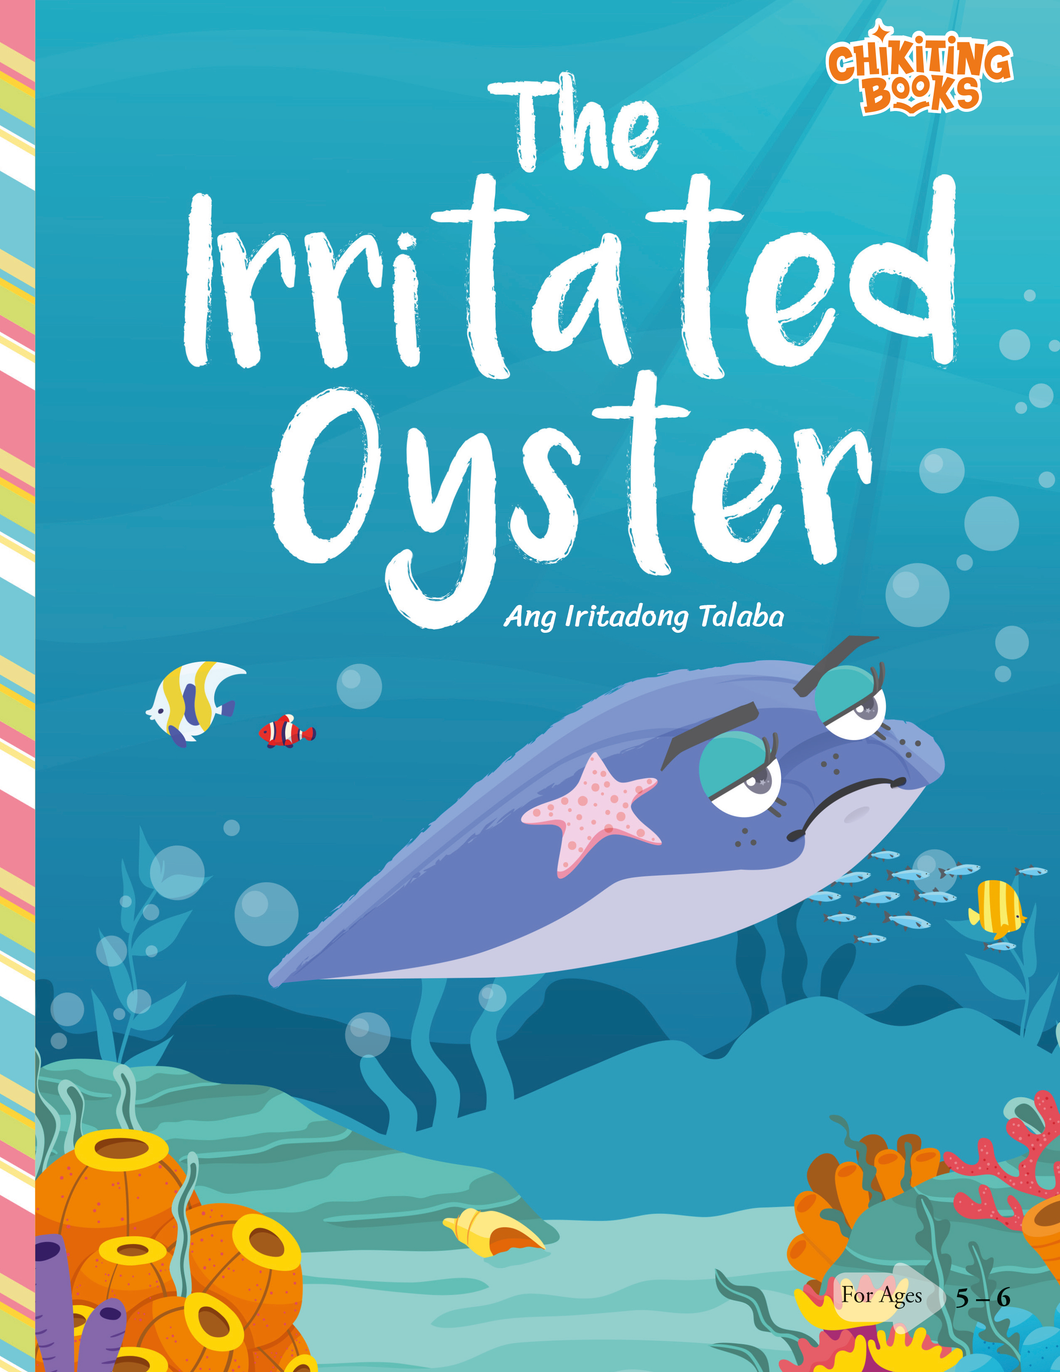 The Irritated Oyster